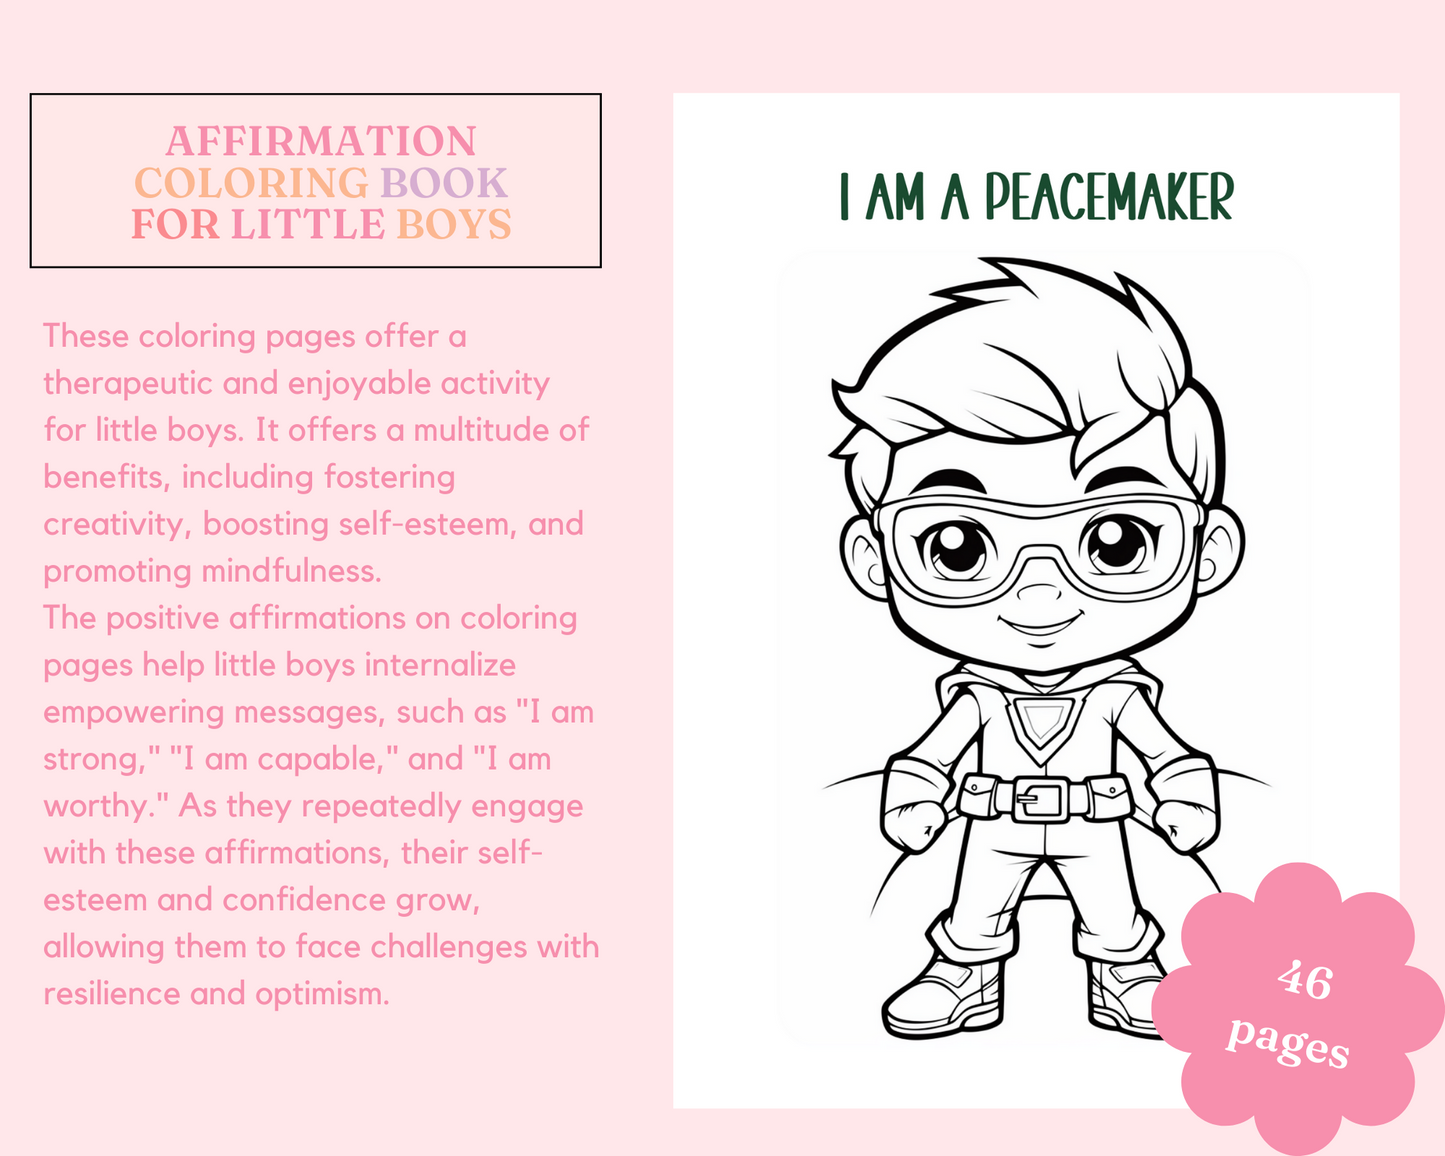 Affirmation Coloring Book for Little Boys – Digital Template – Empowering and Fun